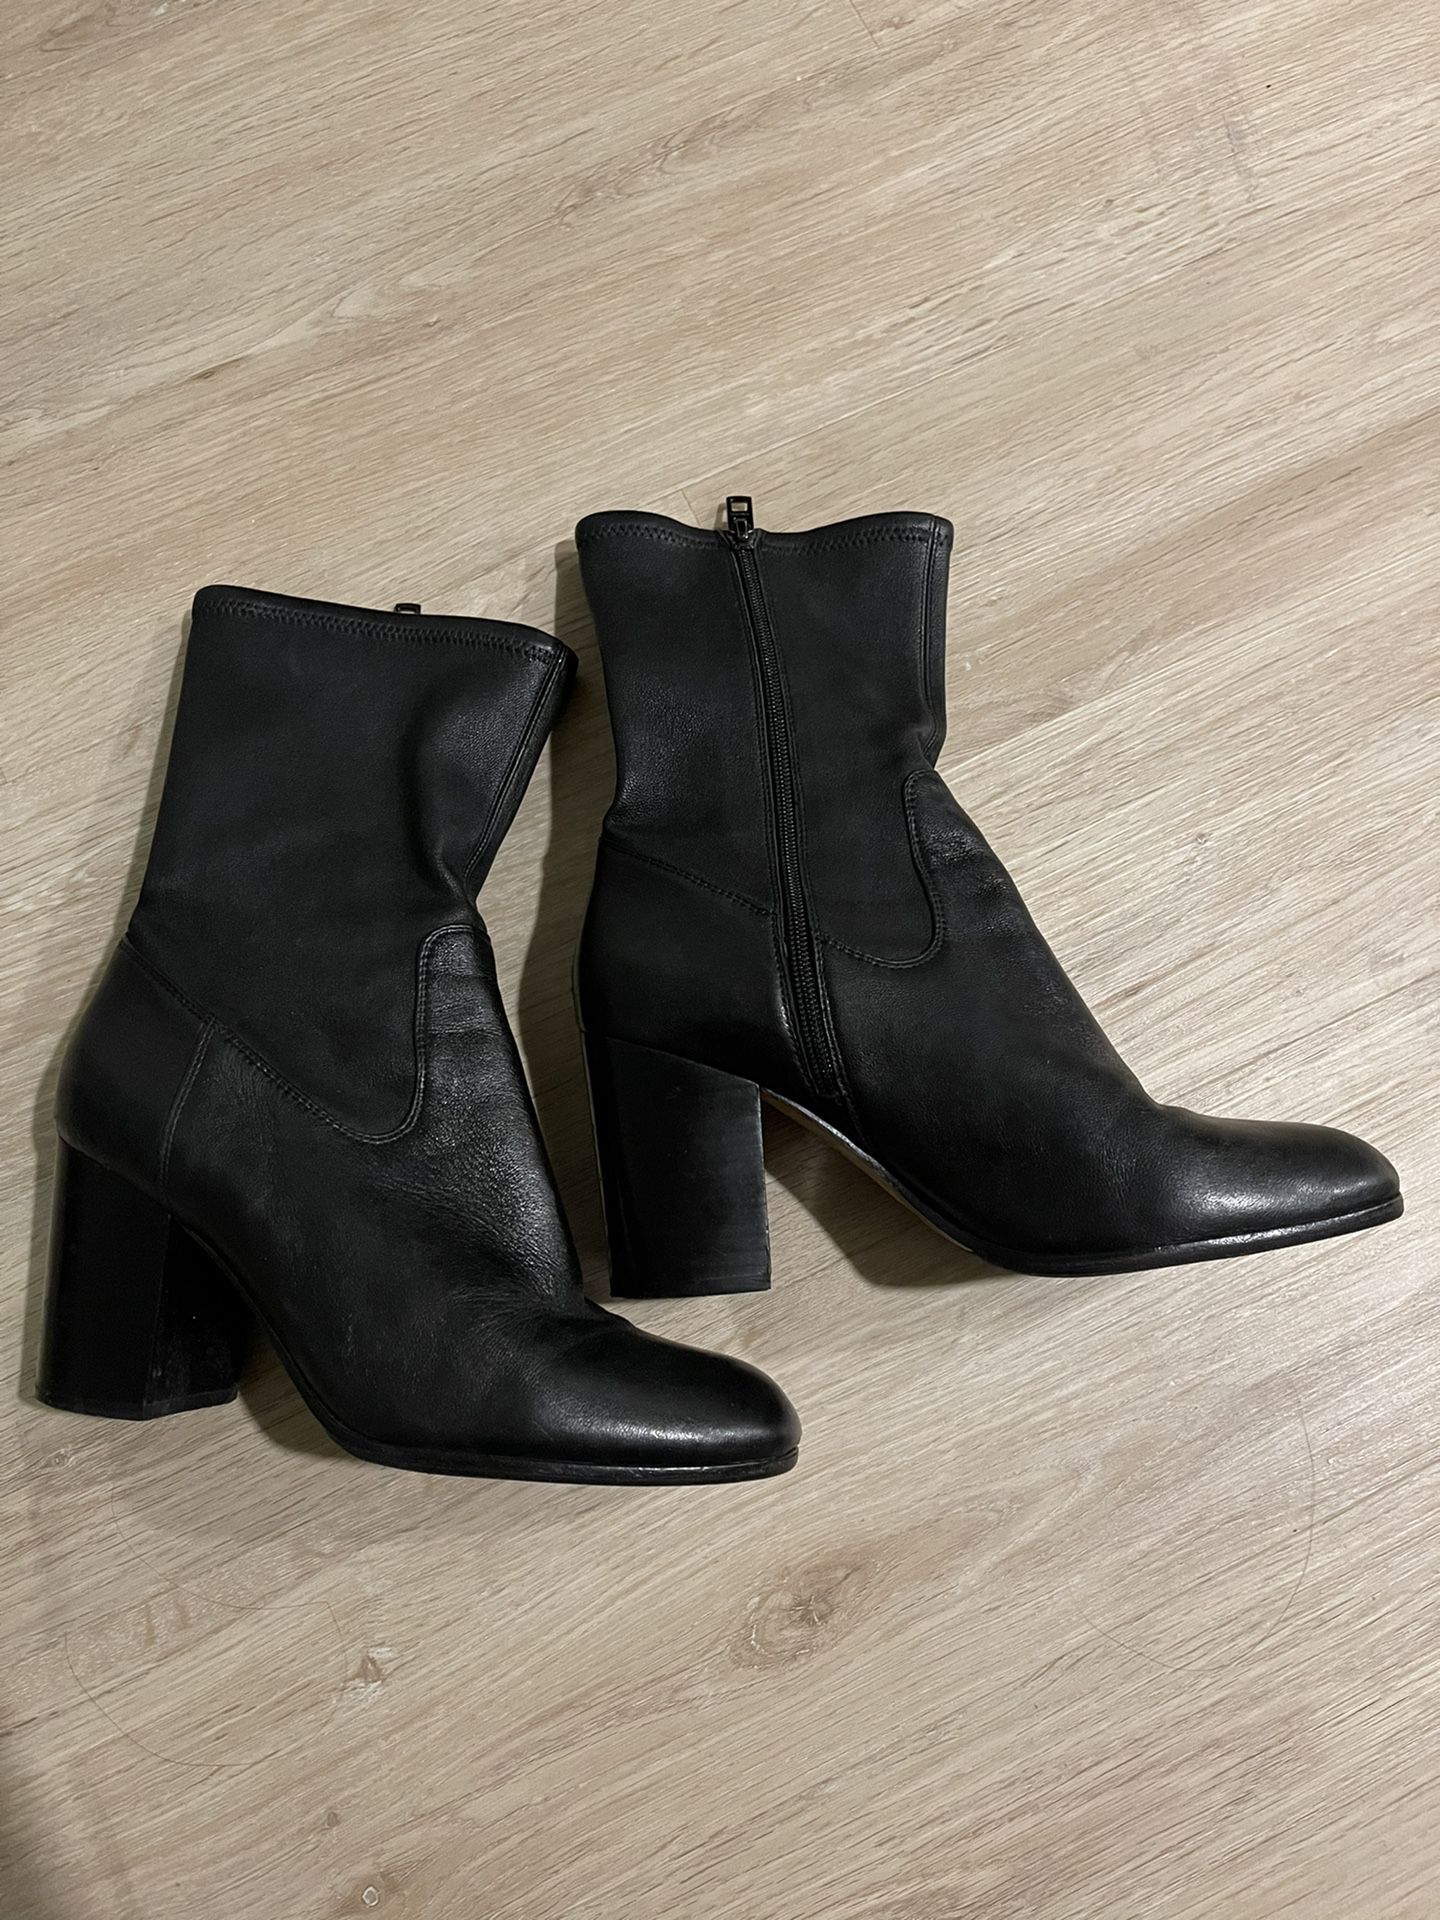 Coach Black Leather Ankle Boots